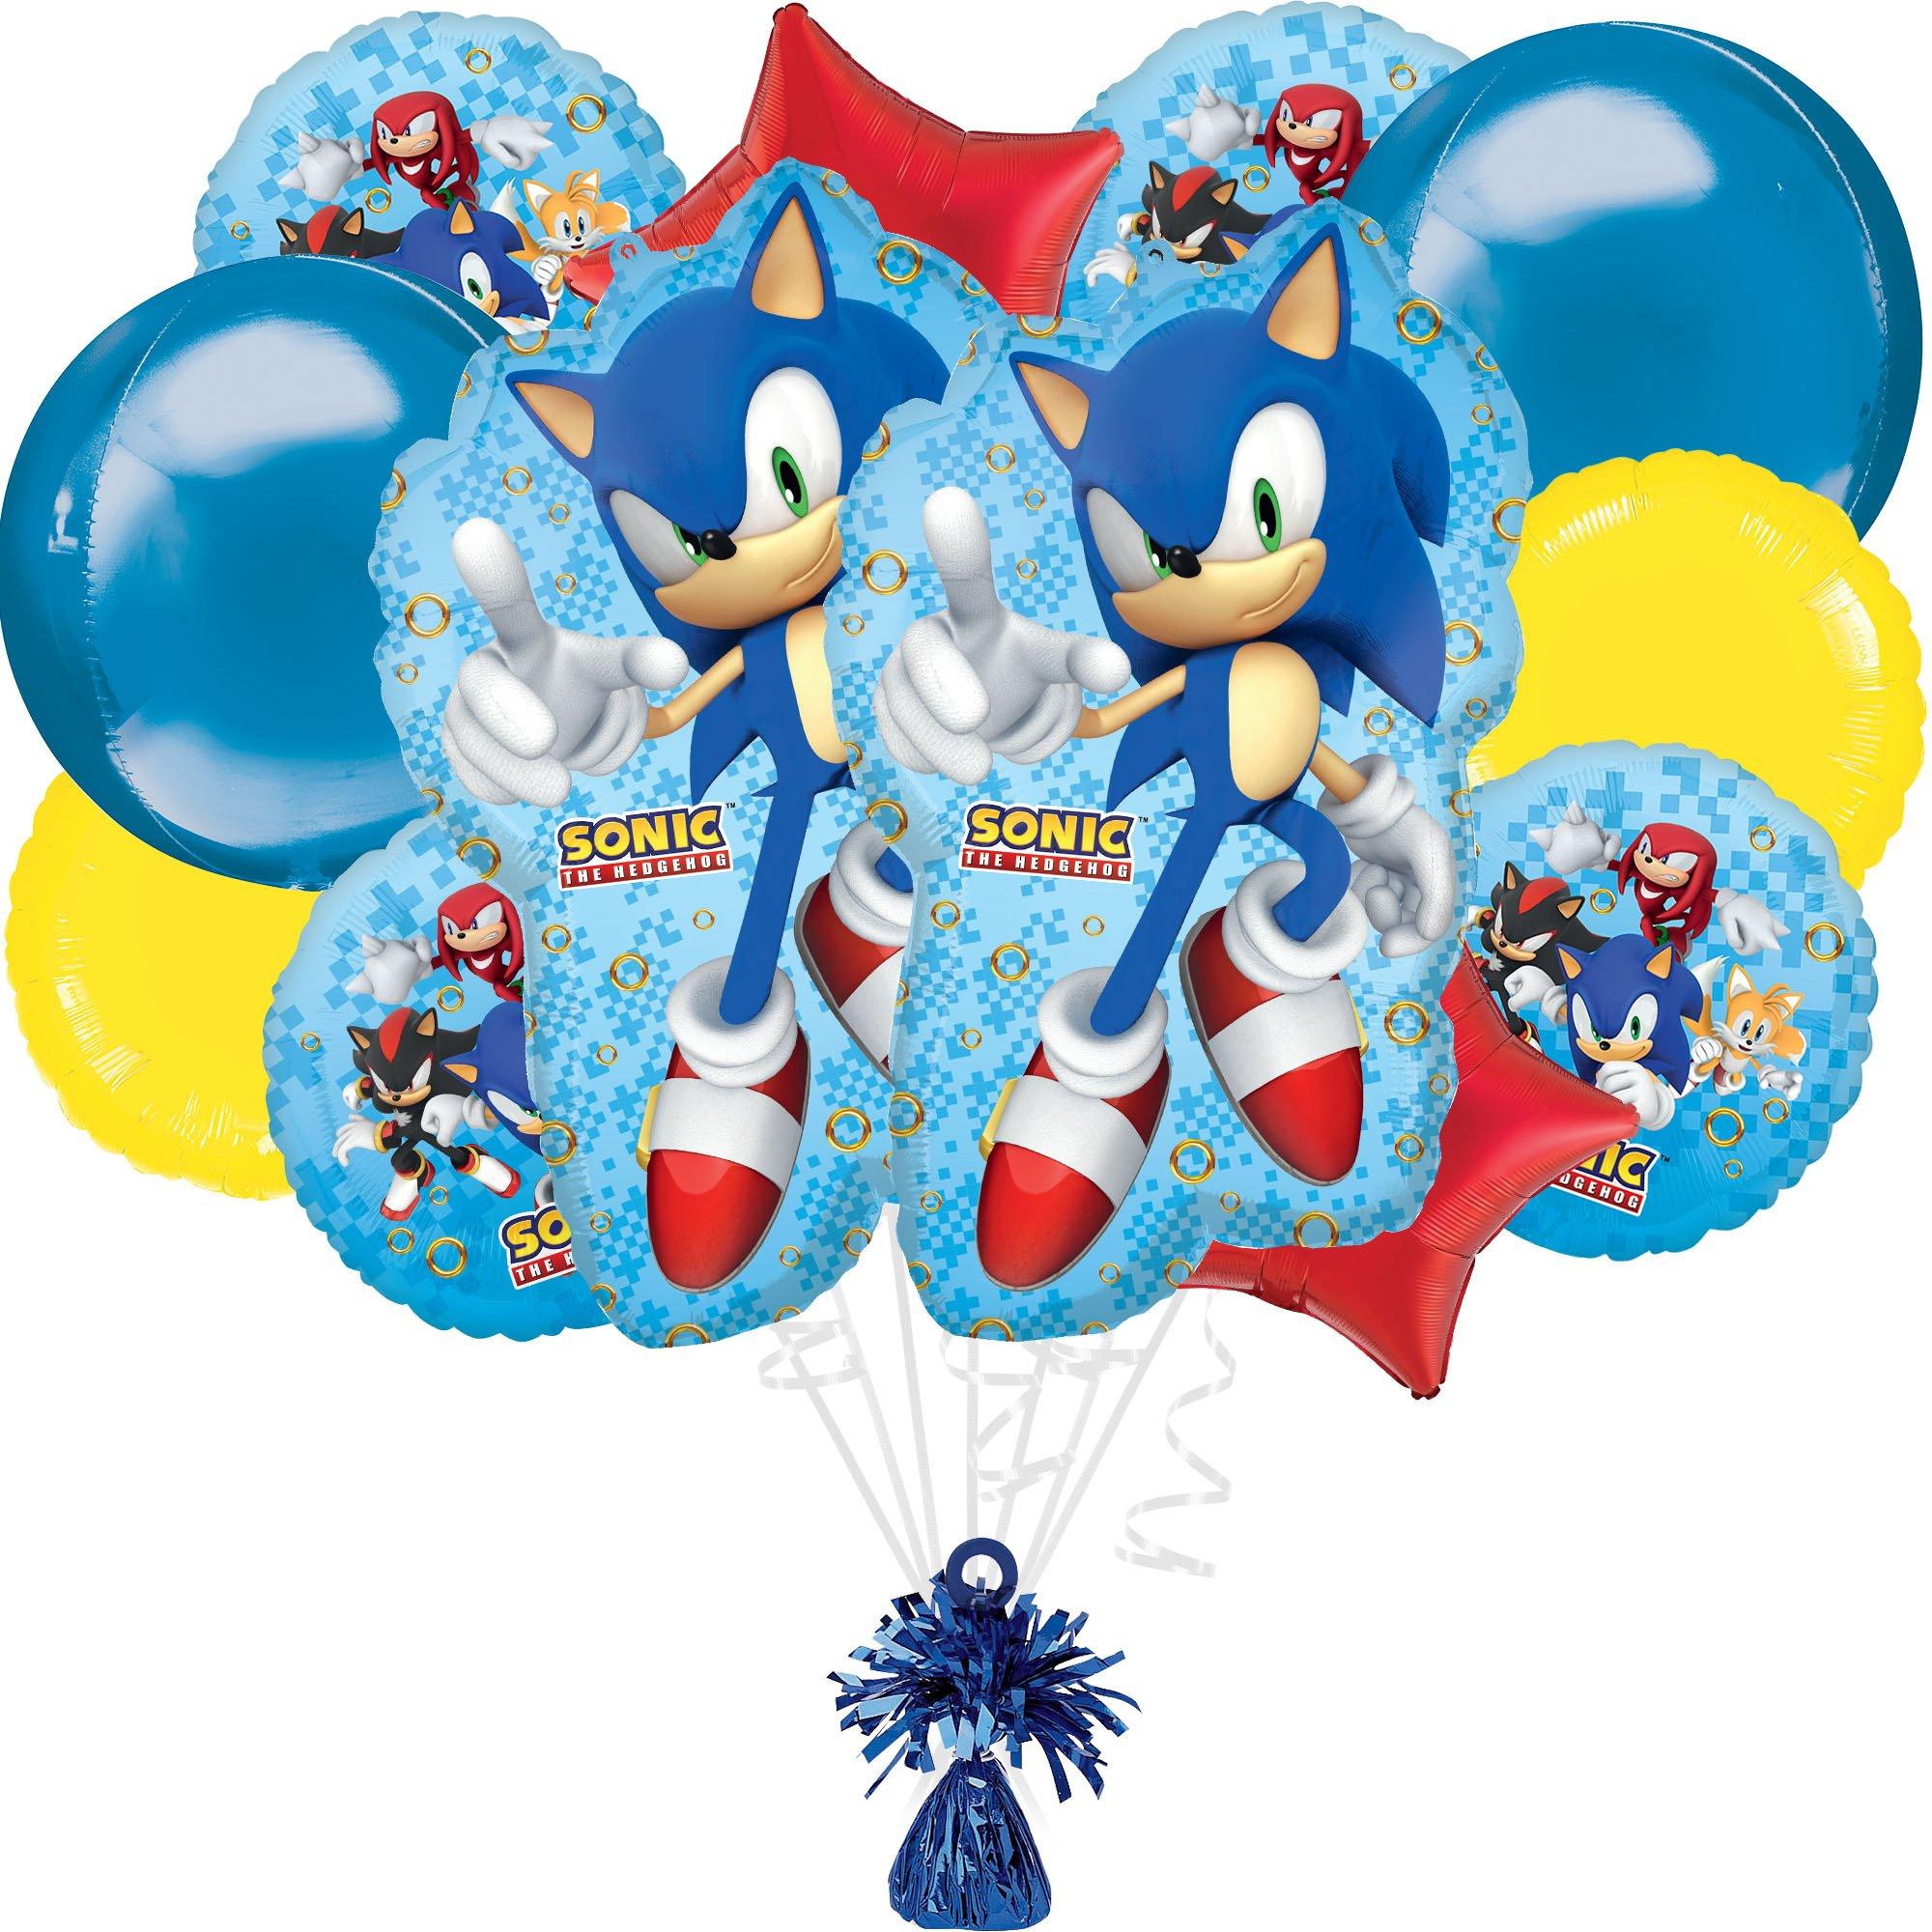 Sonic Birthday Party Supplies, 23Pcs The Hedgehog Theme Party